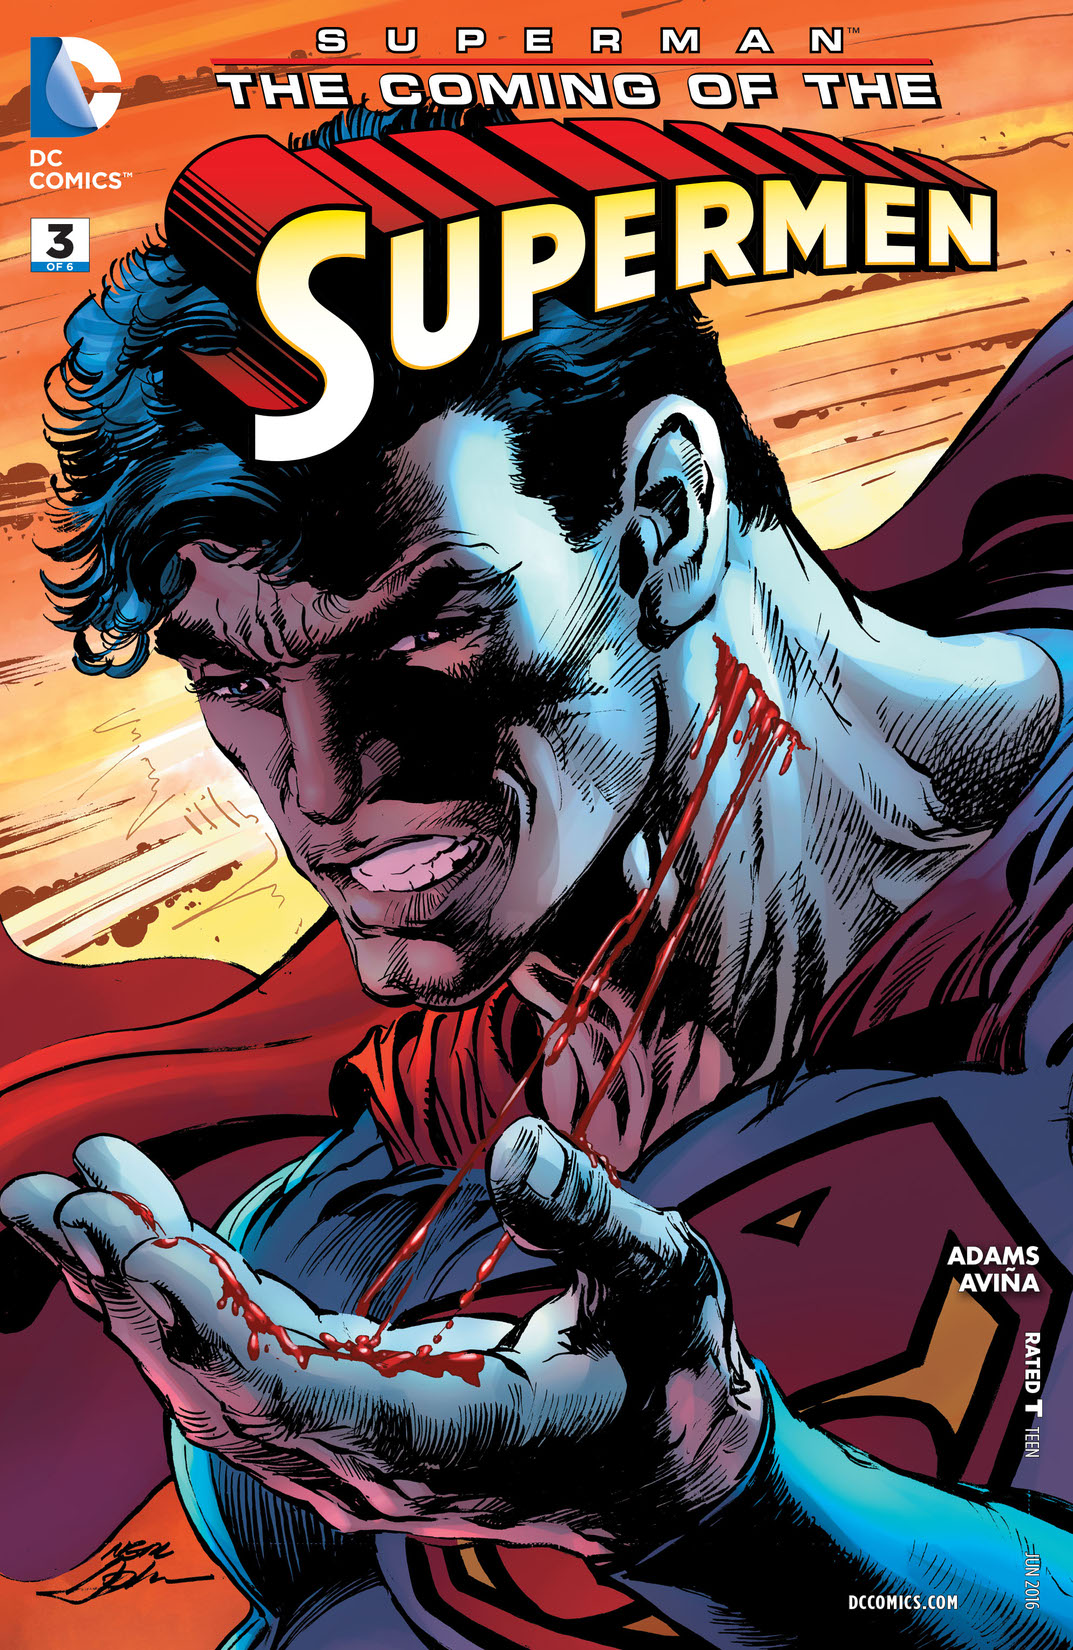 Superman: The Coming of the Supermen #3 preview images